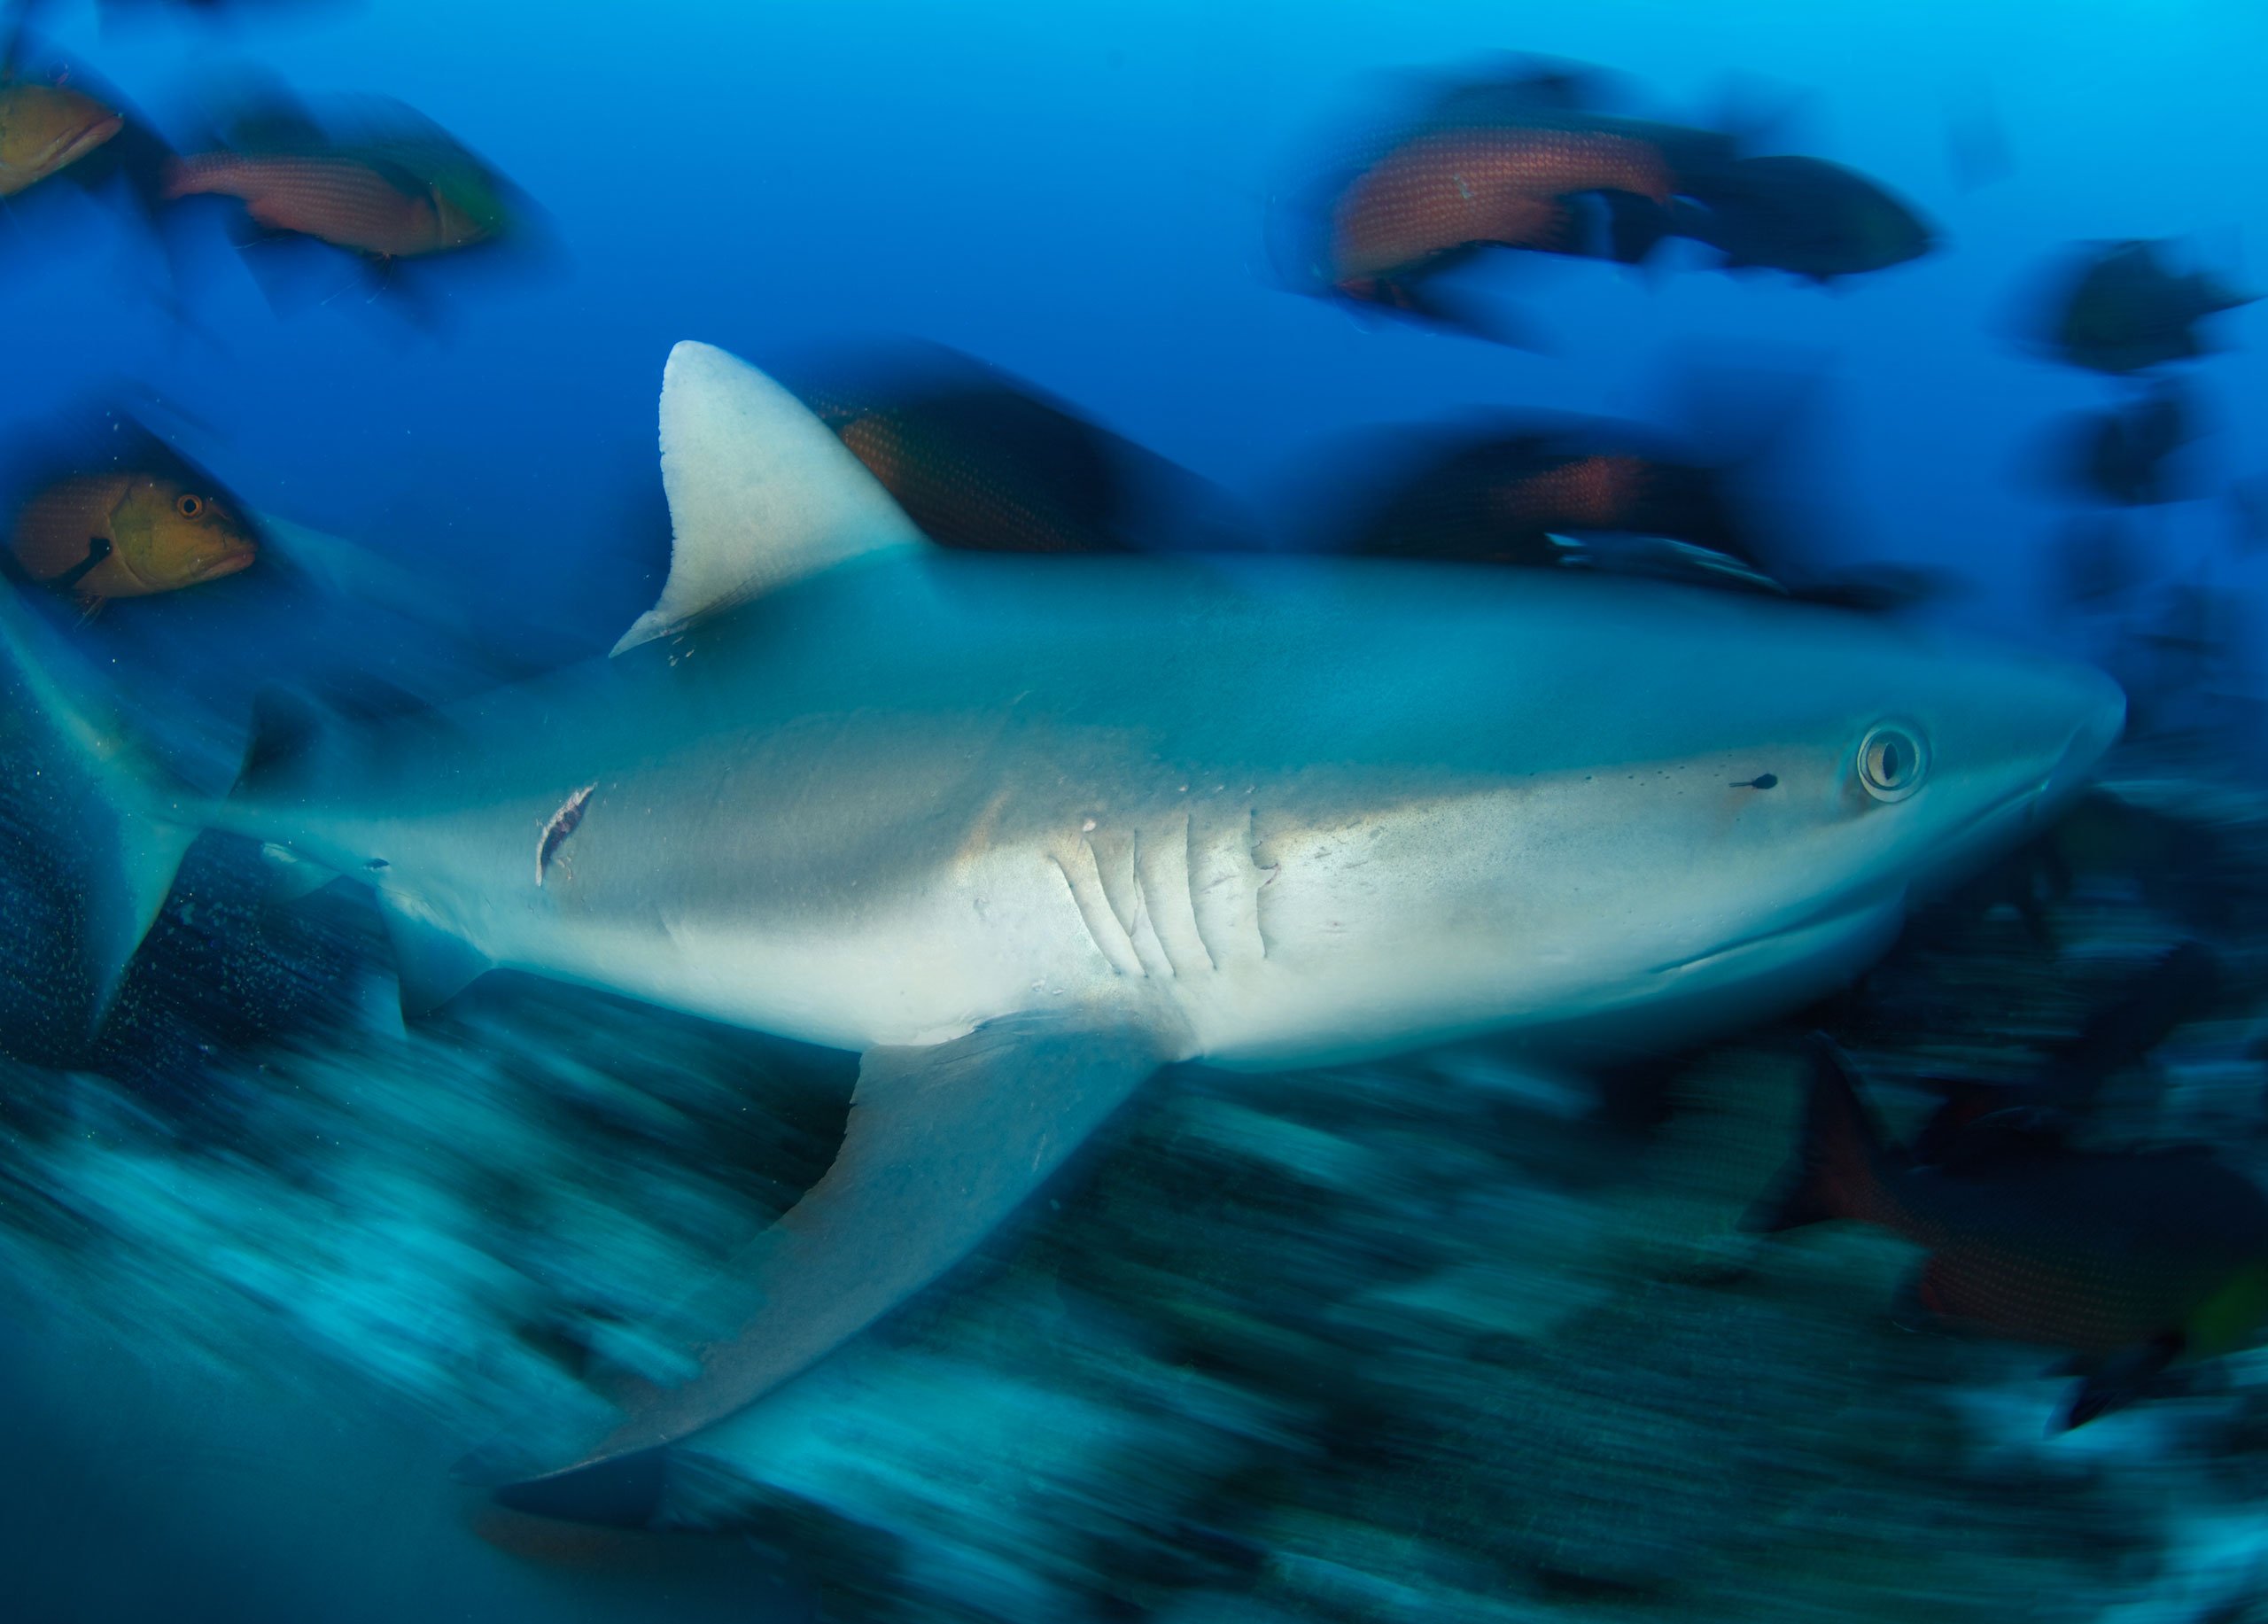 Skittish grey reef sharks are the wardens of the reef. Torpedo-shaped and monochrome, they are regularly encountered patrolling around D’Arros Island.<br>Photo by Rainer von Brandis | © Save Our Seas Foundation